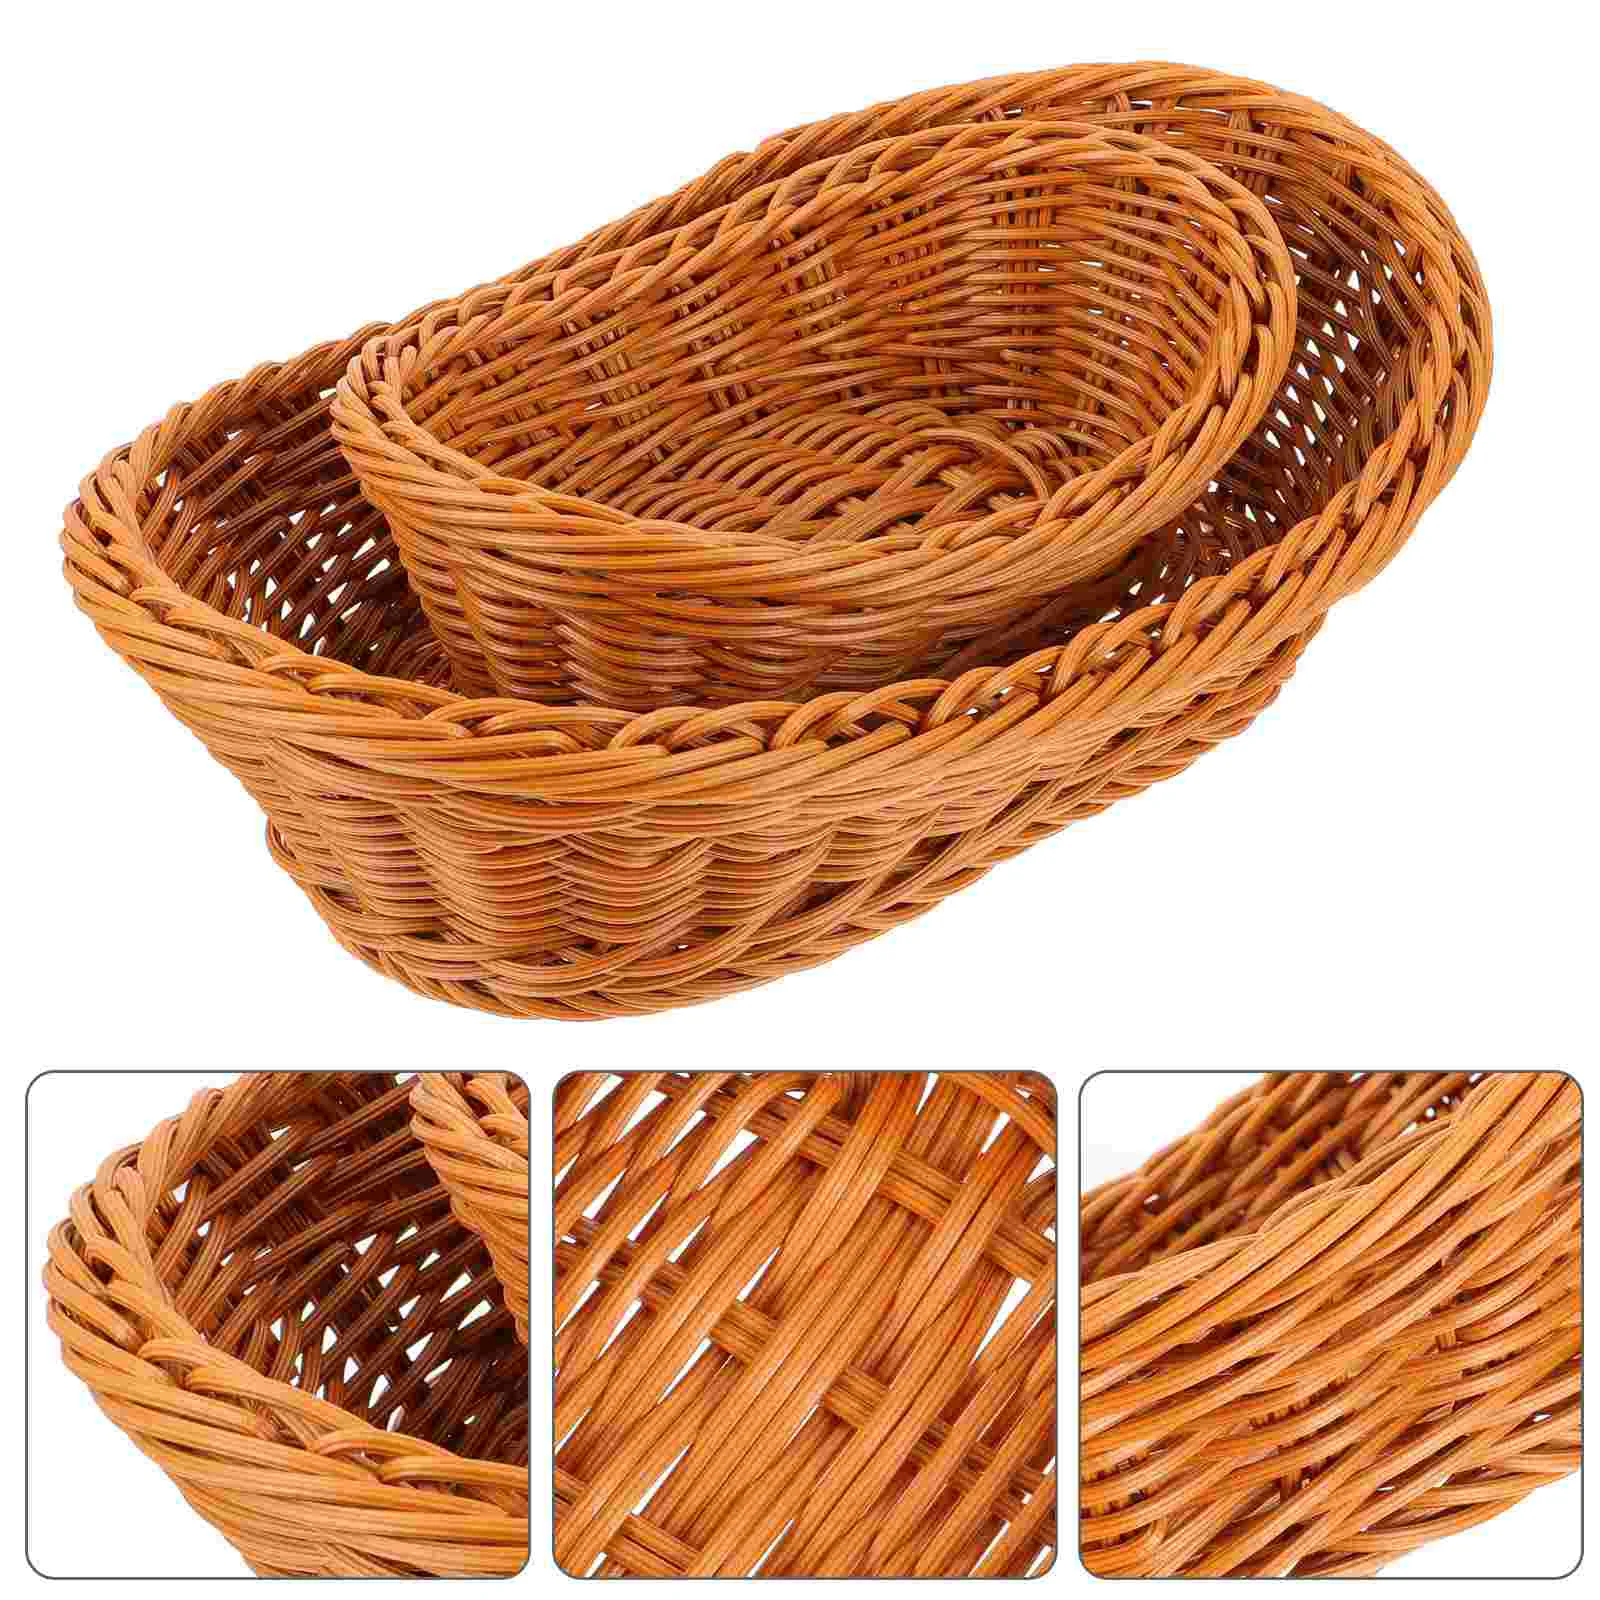 

Basket Wicker Woven Fruit Baskets Tray Rattan Serving Bowl Storage Snack Food Stand Centerpiece Vegetables Bread Plastic Oval